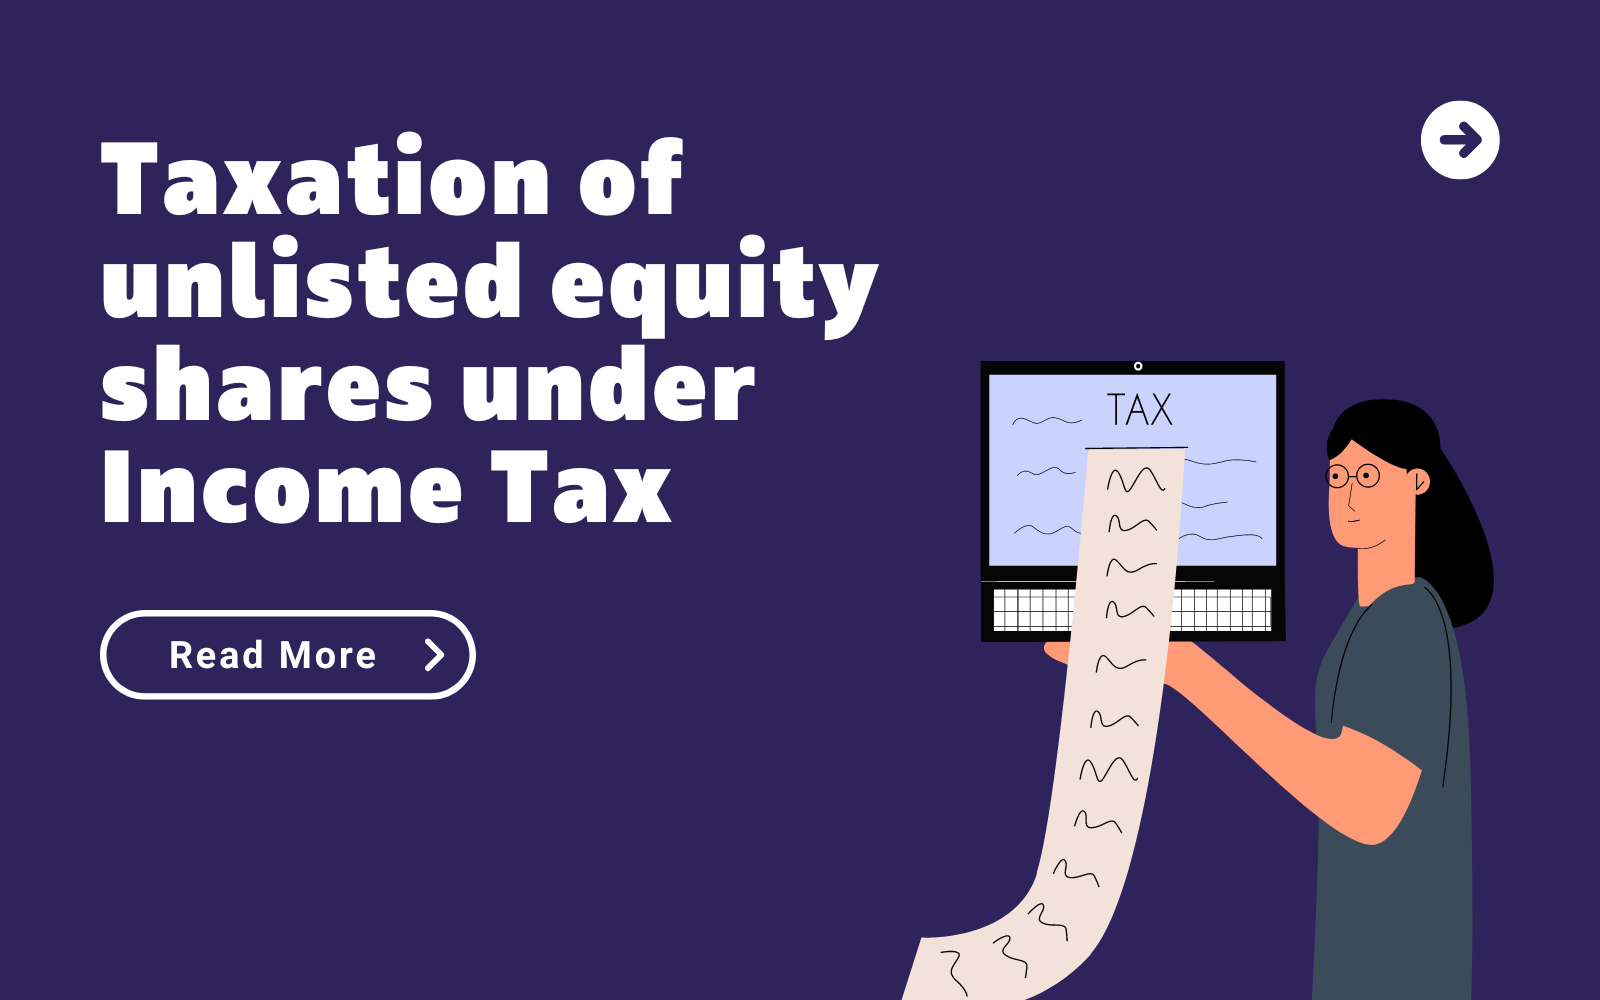 Taxation Of Unlisted Equity Shares Under Income Tax